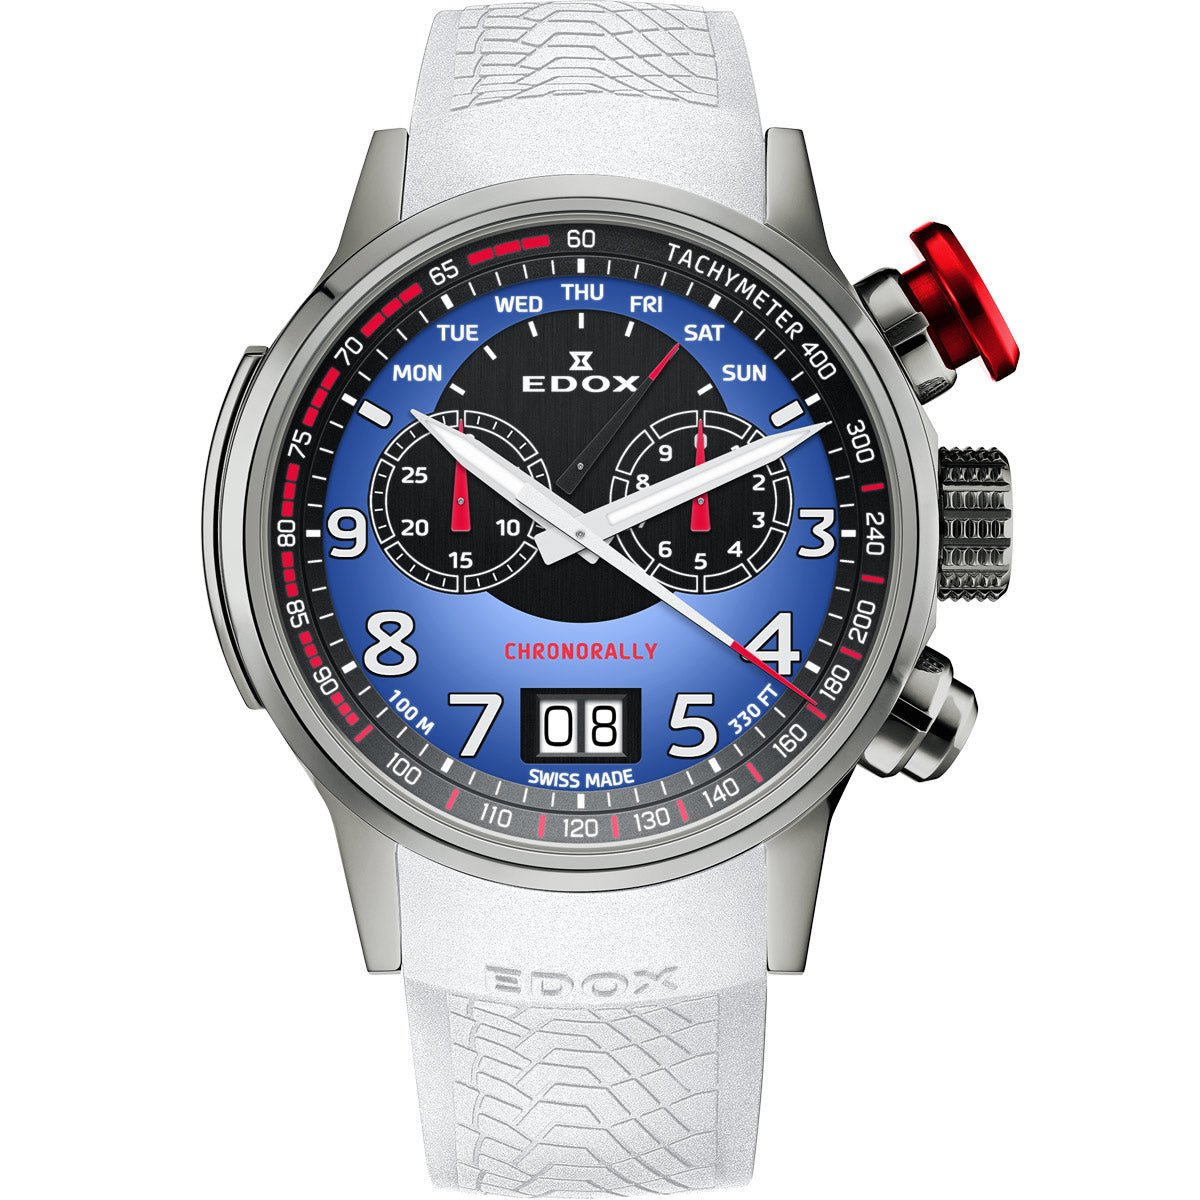 Edox - Chronorally Chronograph Limited Edition 1 of 2000 - Watch